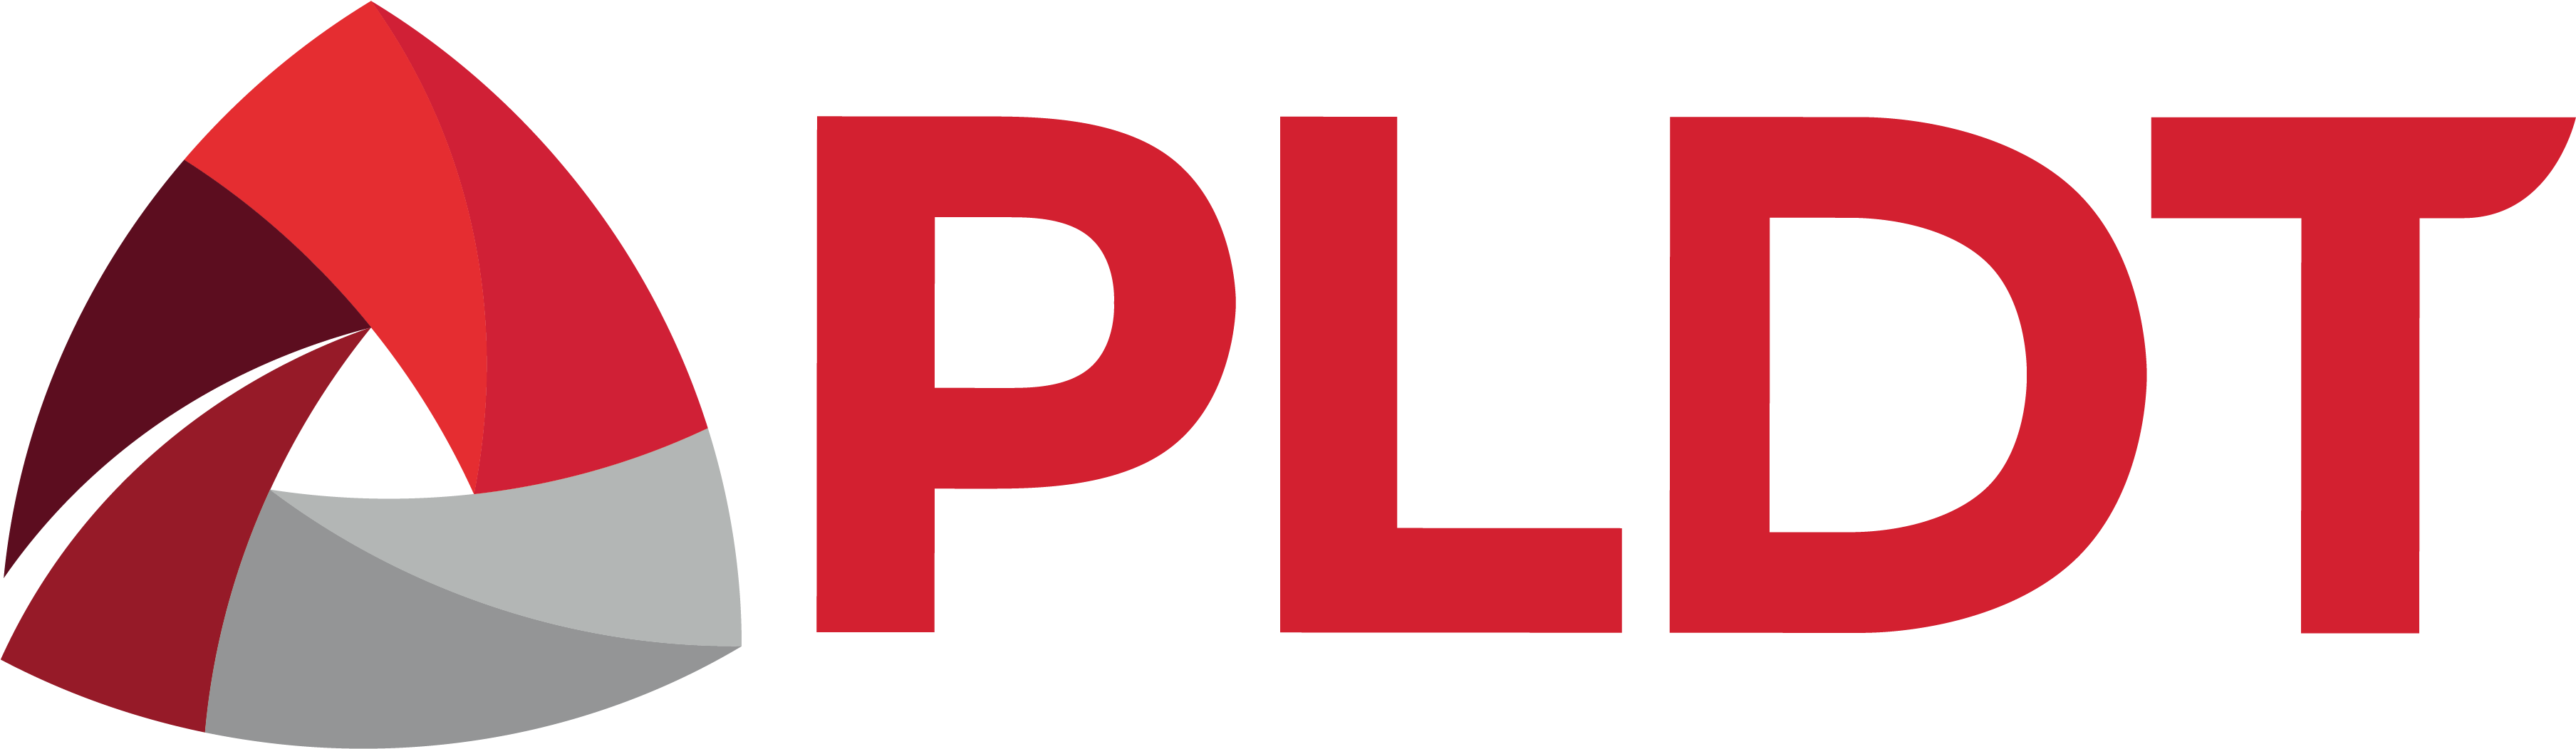 Projects - Philippine Long Distance Telephone Company Logo (3738x1114)